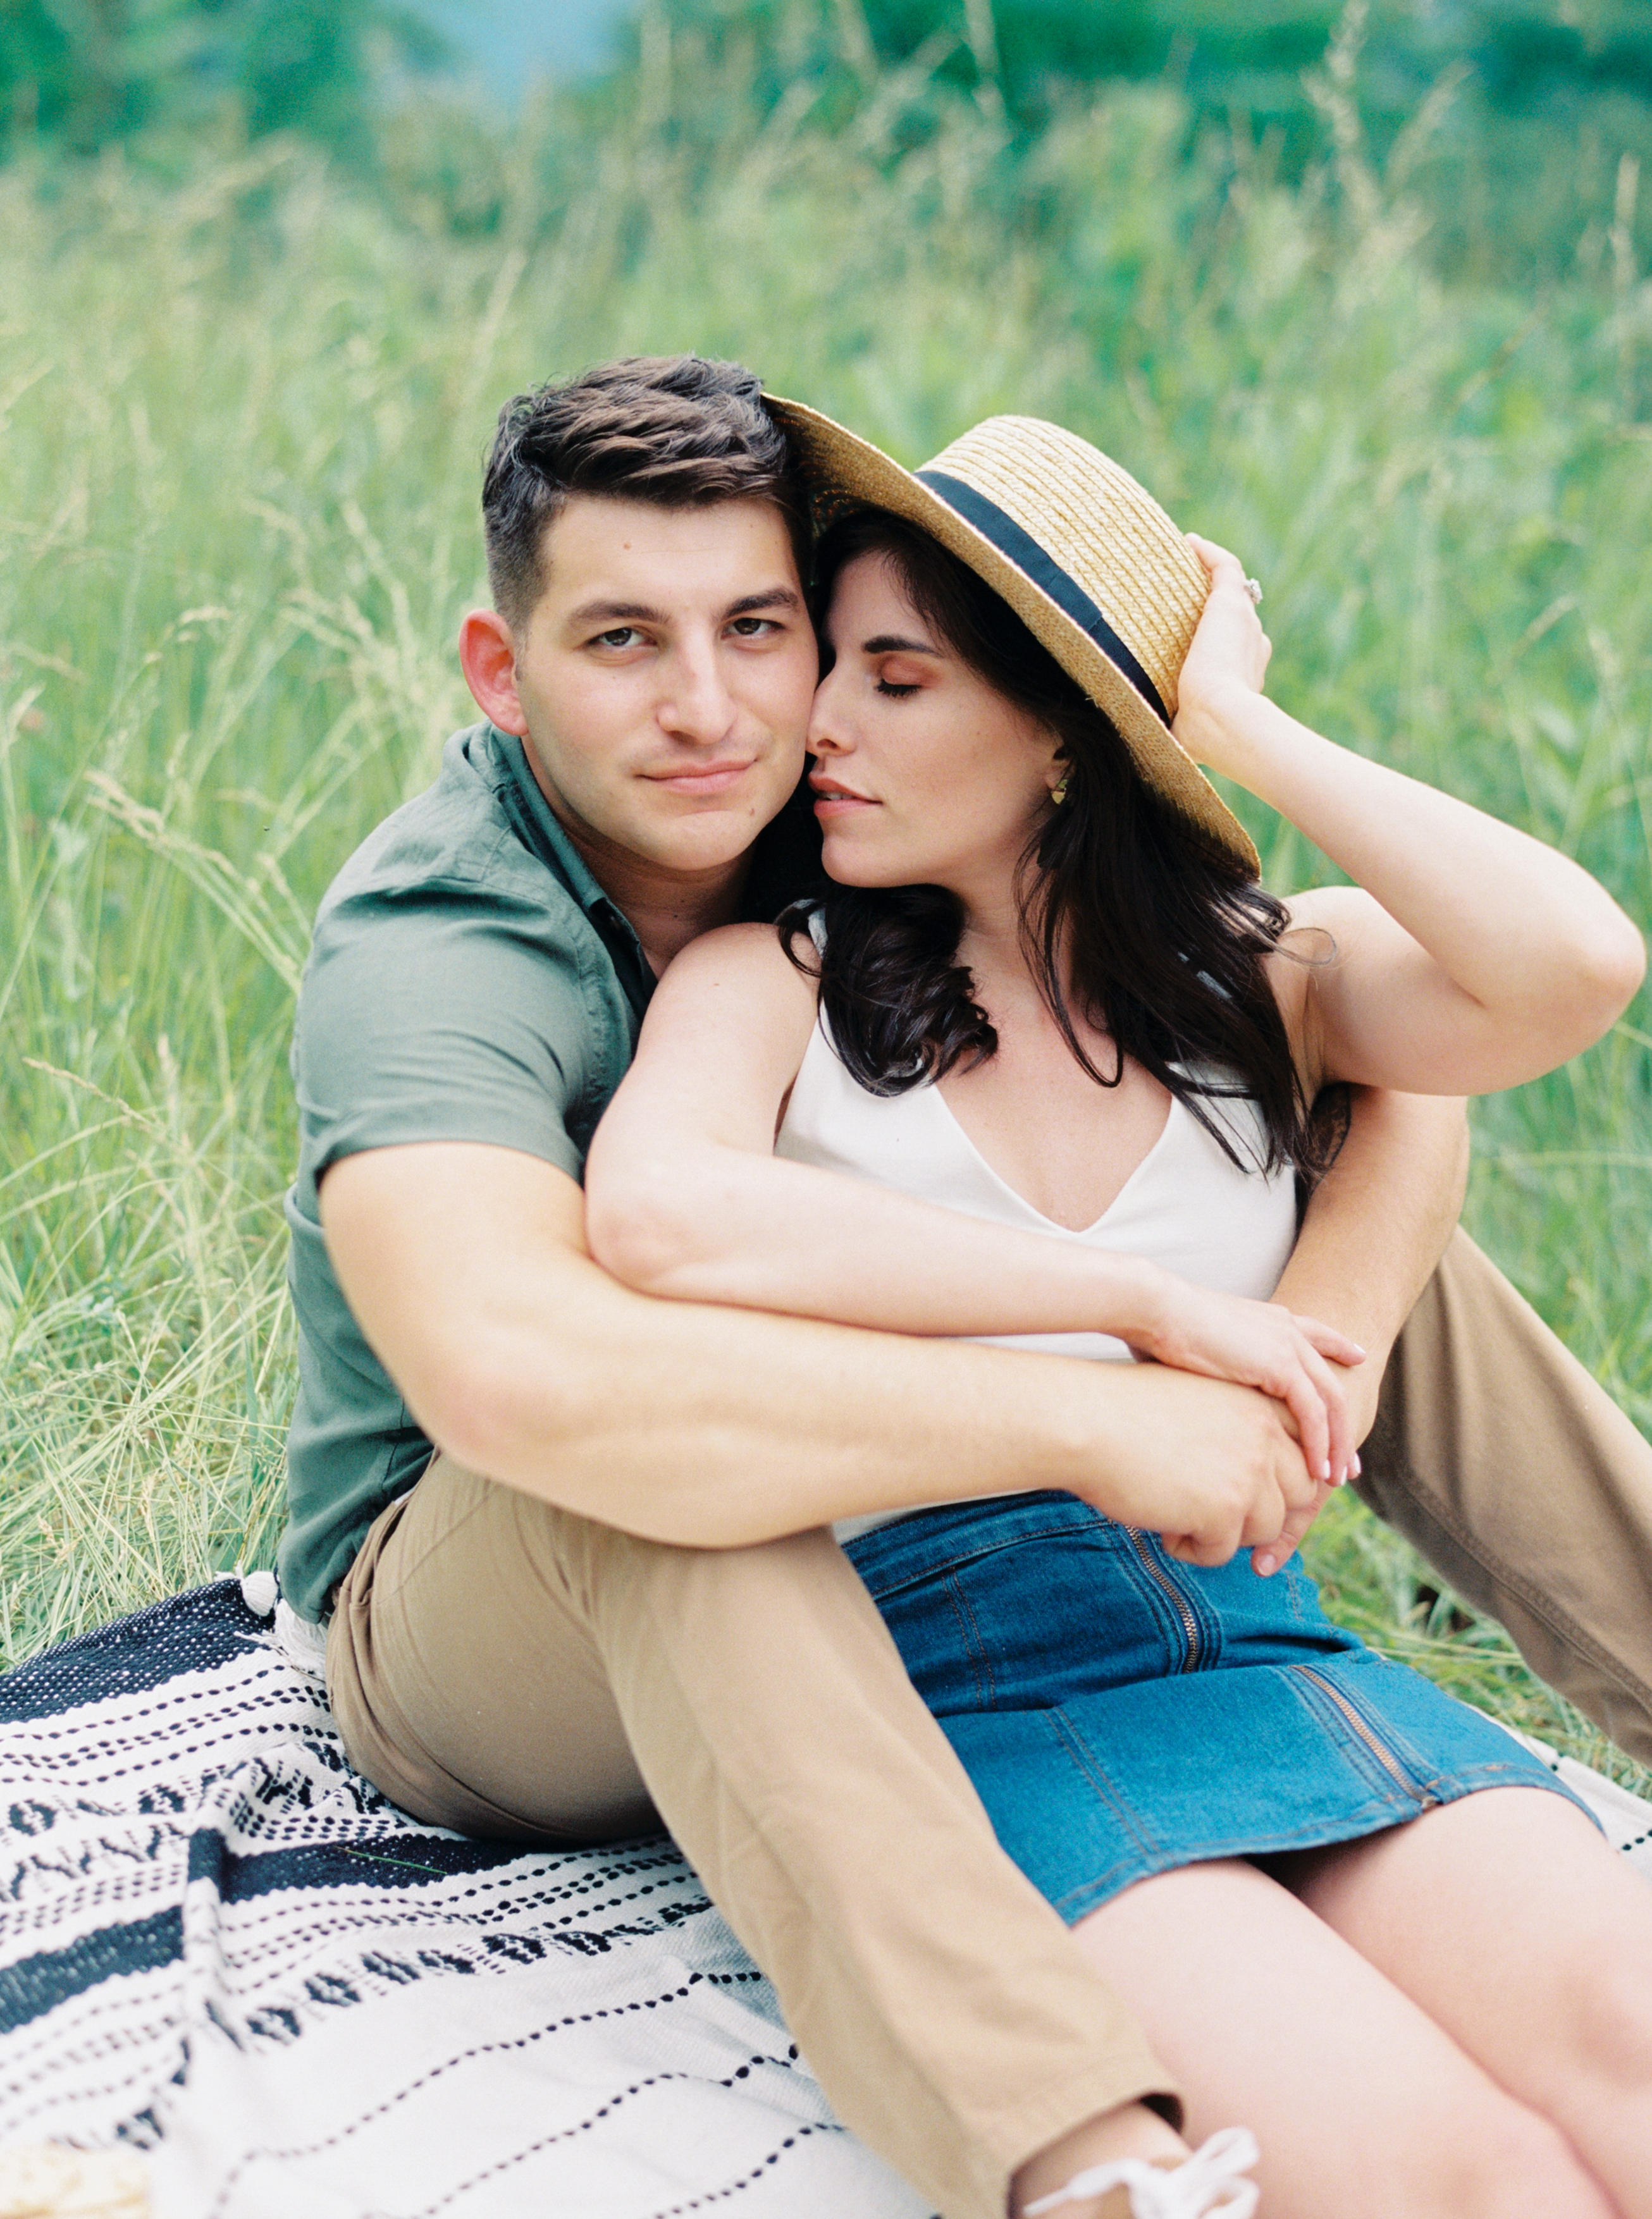 Virginia mountain engagement session picnic